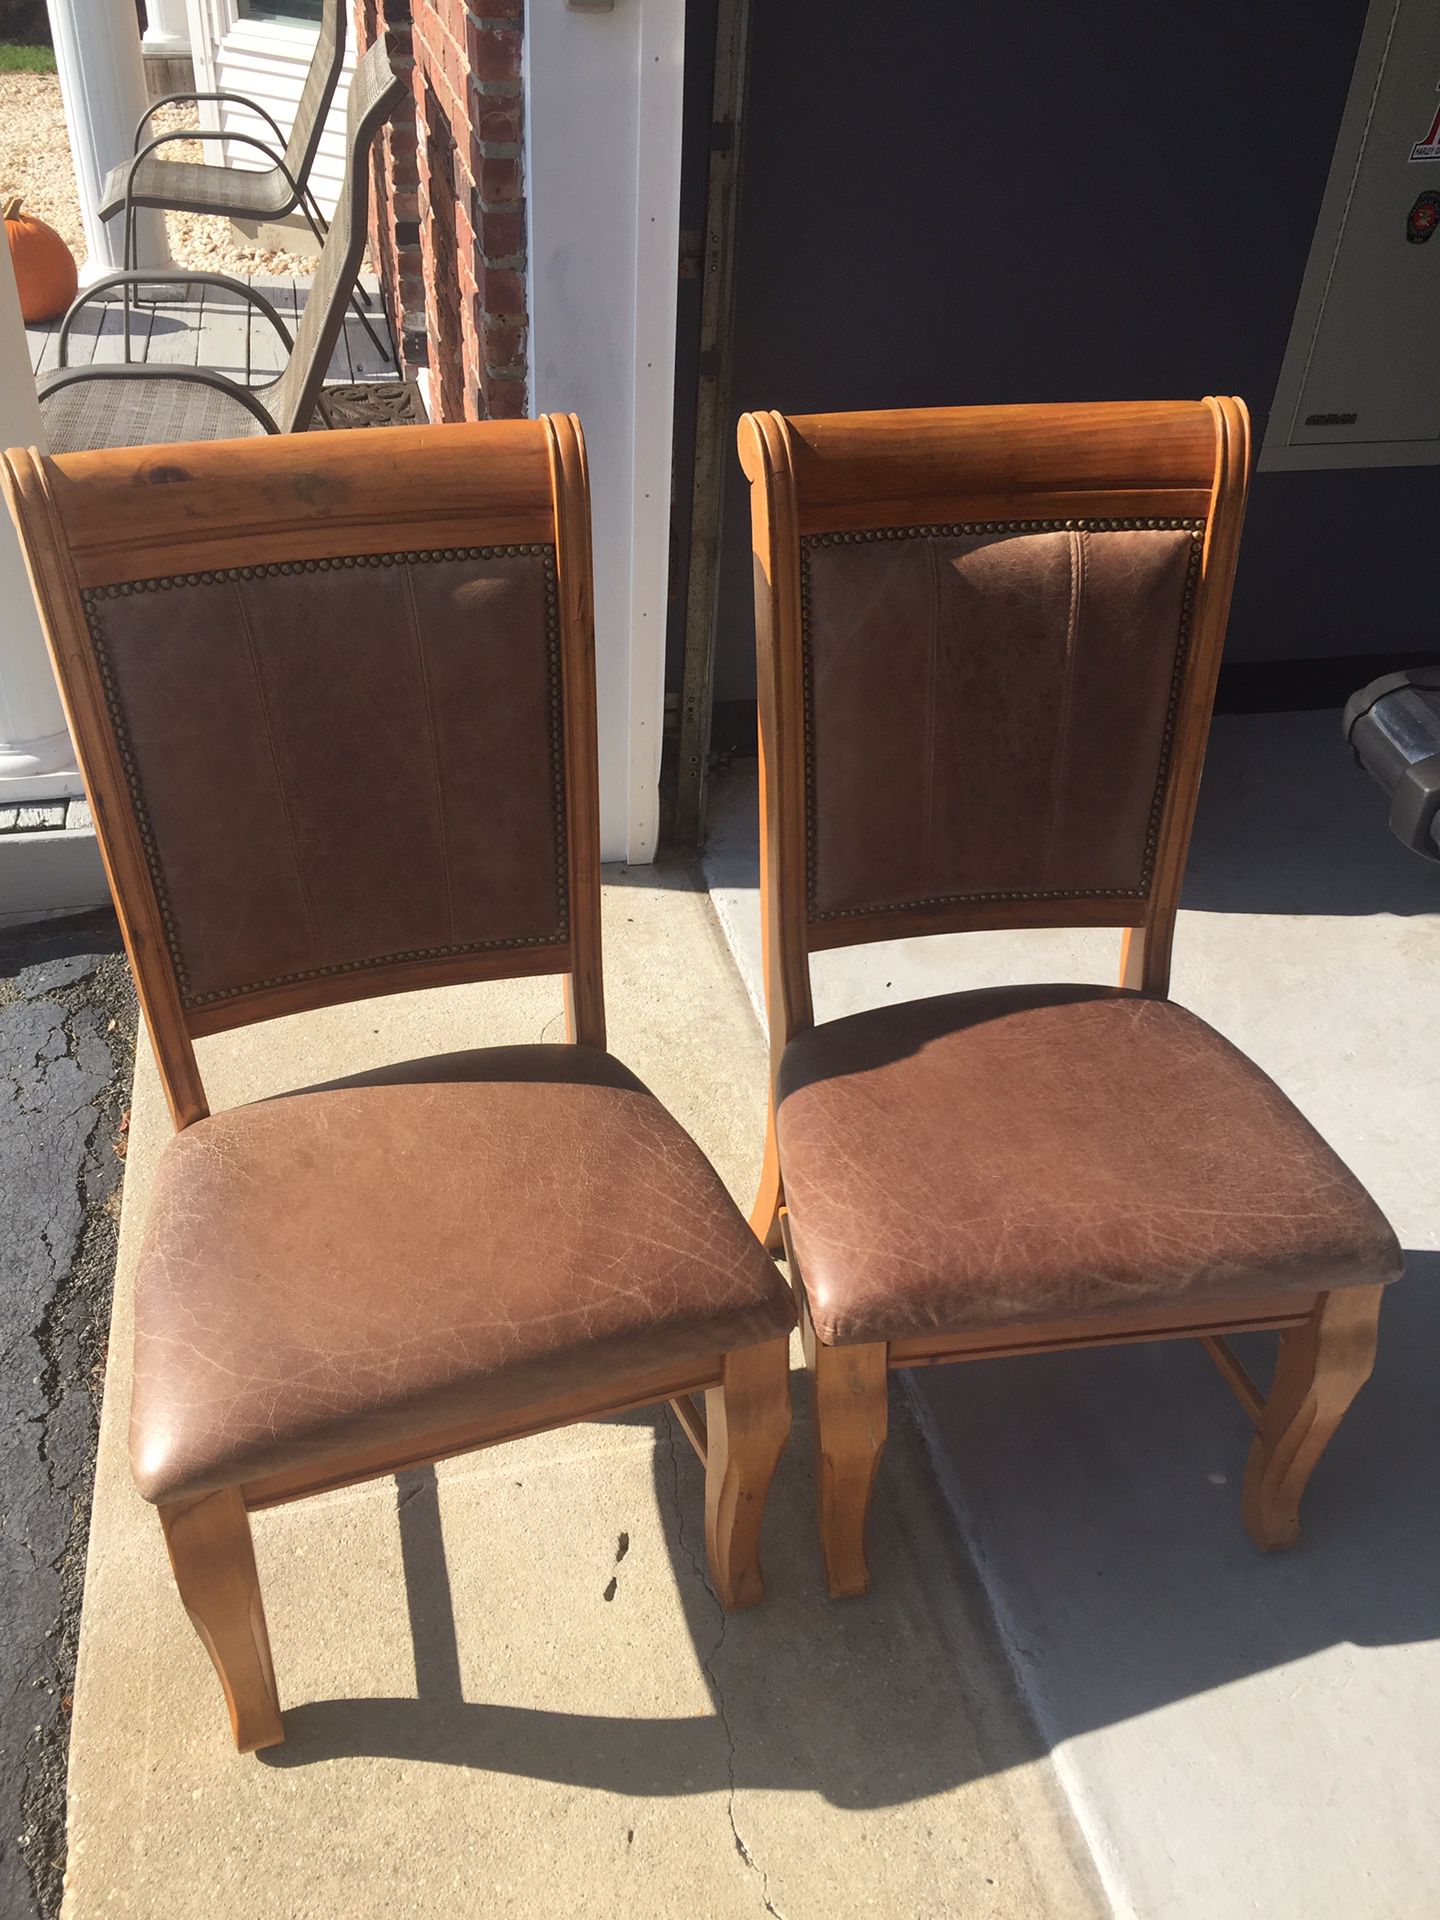 2 sturdy wooden and leather chairs